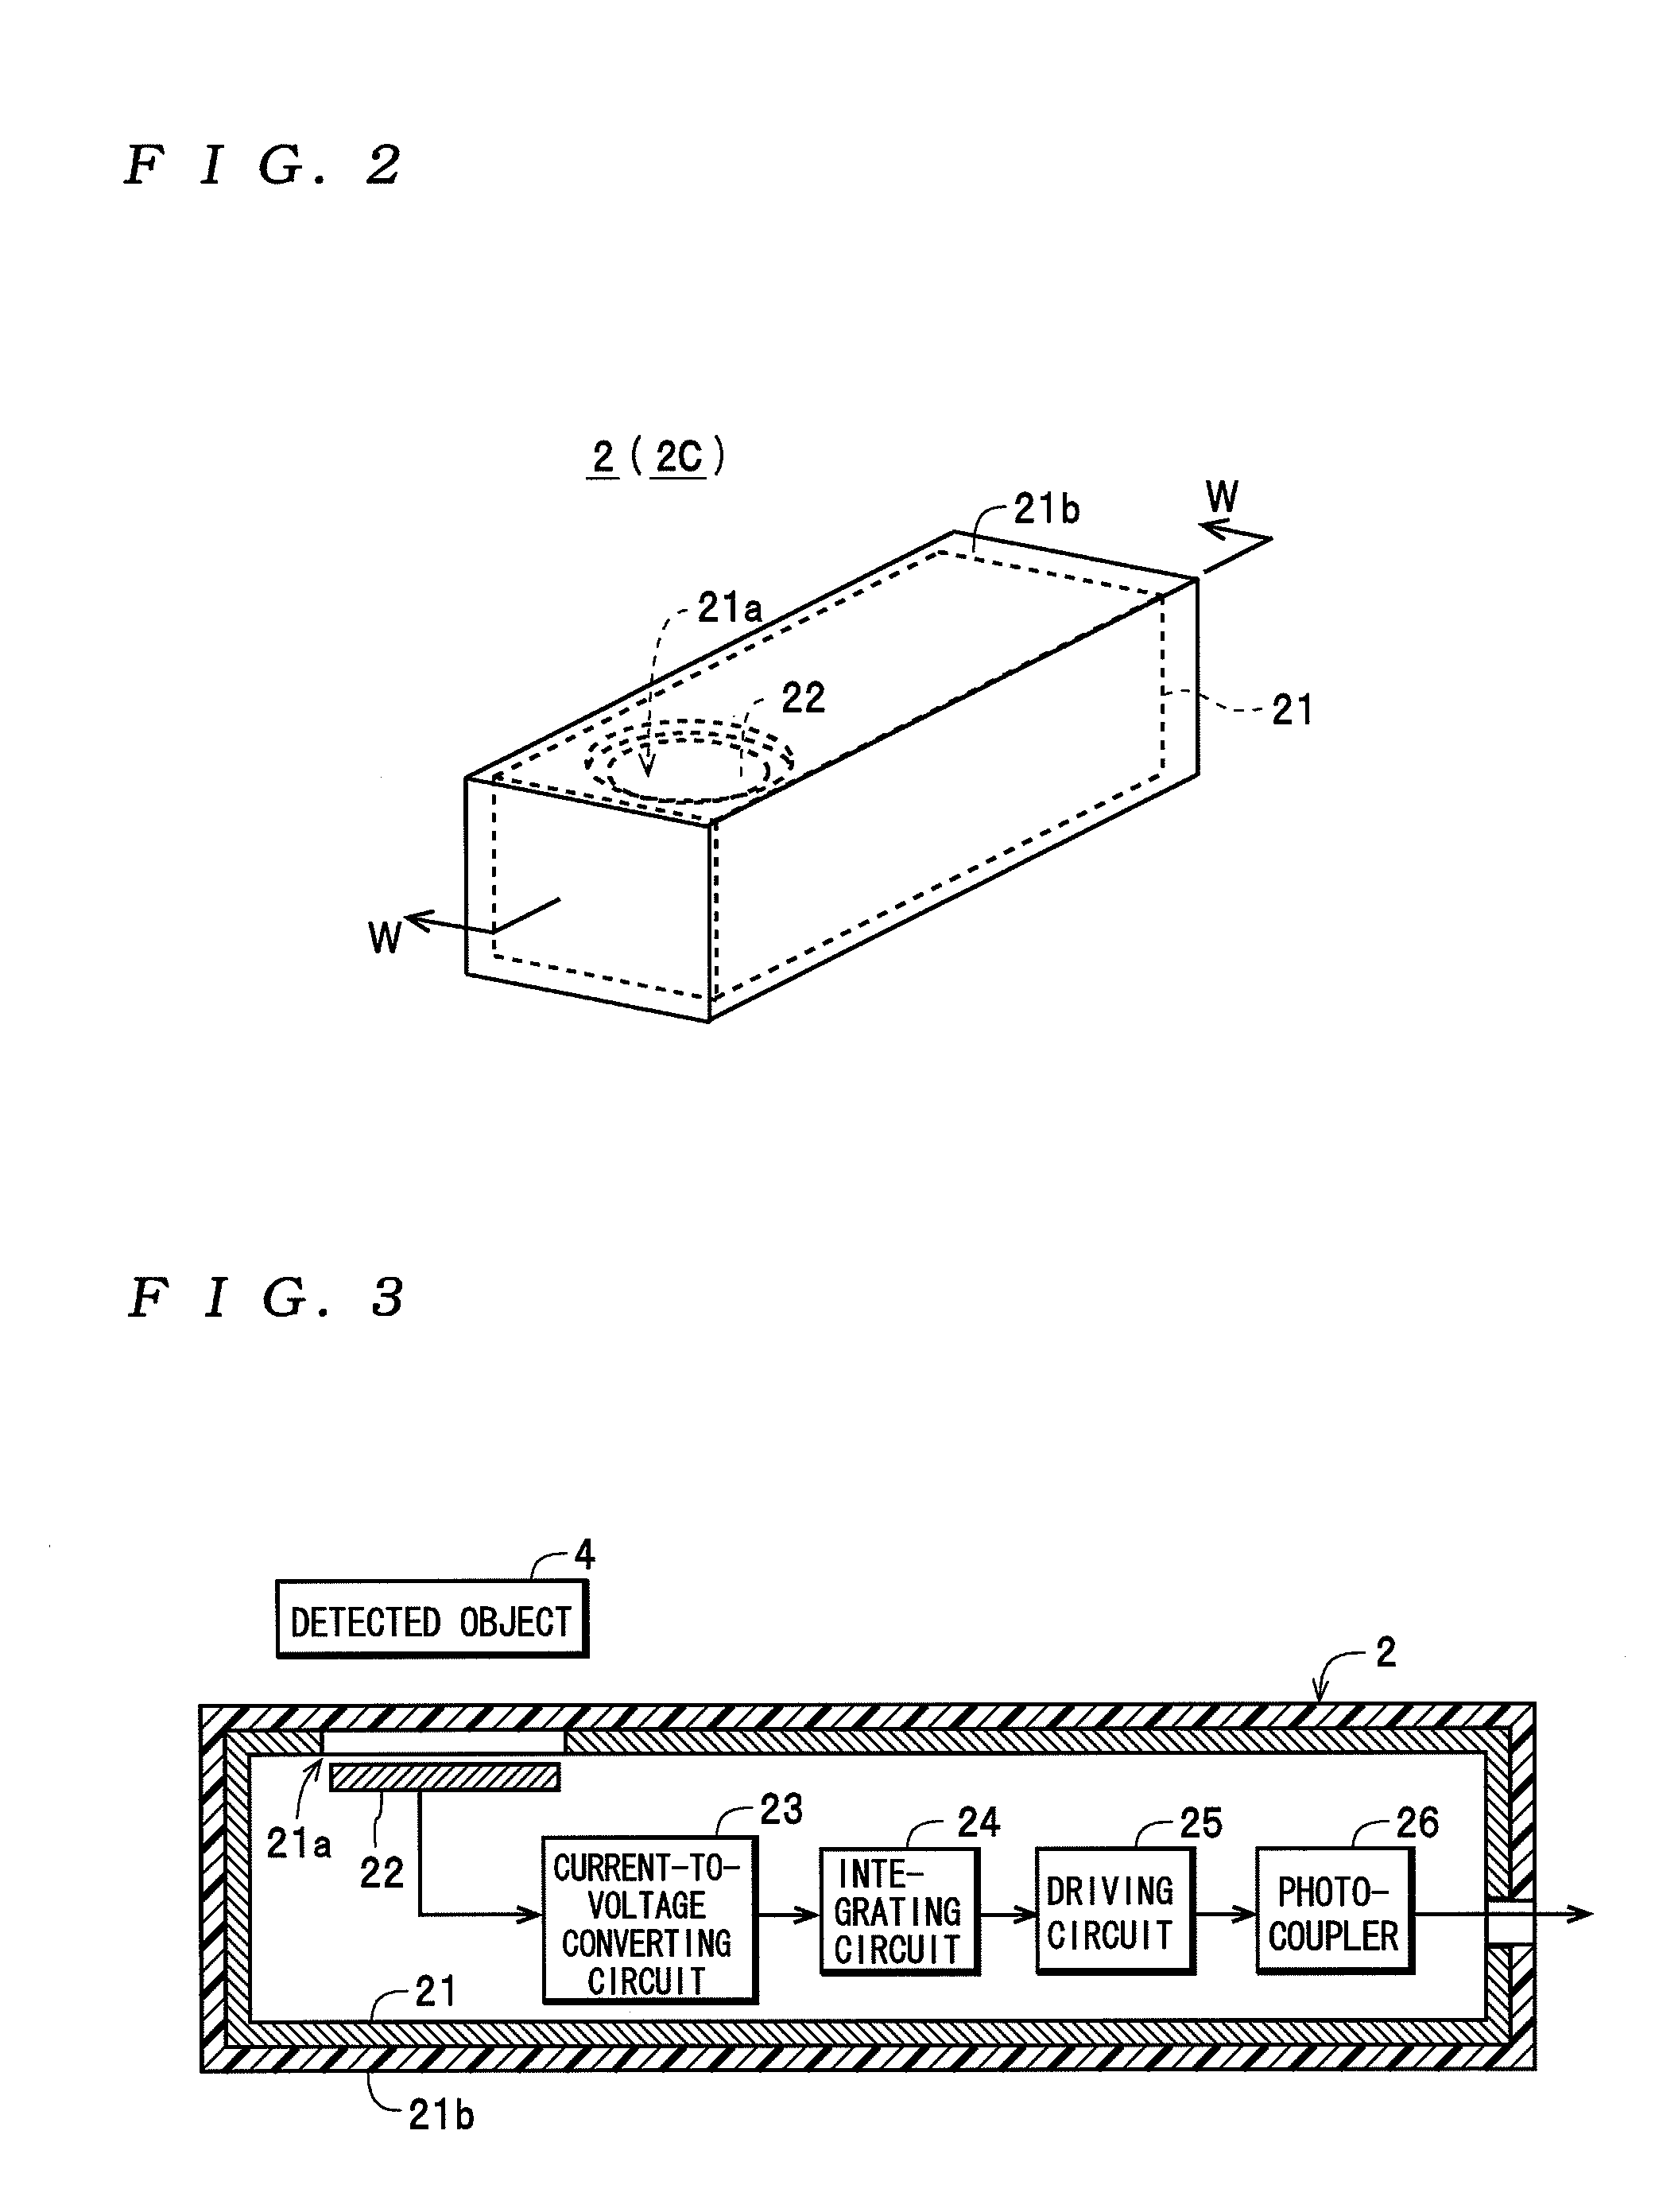 Voltage detecting apparatus and line voltage detecting apparatus having a detection electrode disposed facing a detected object